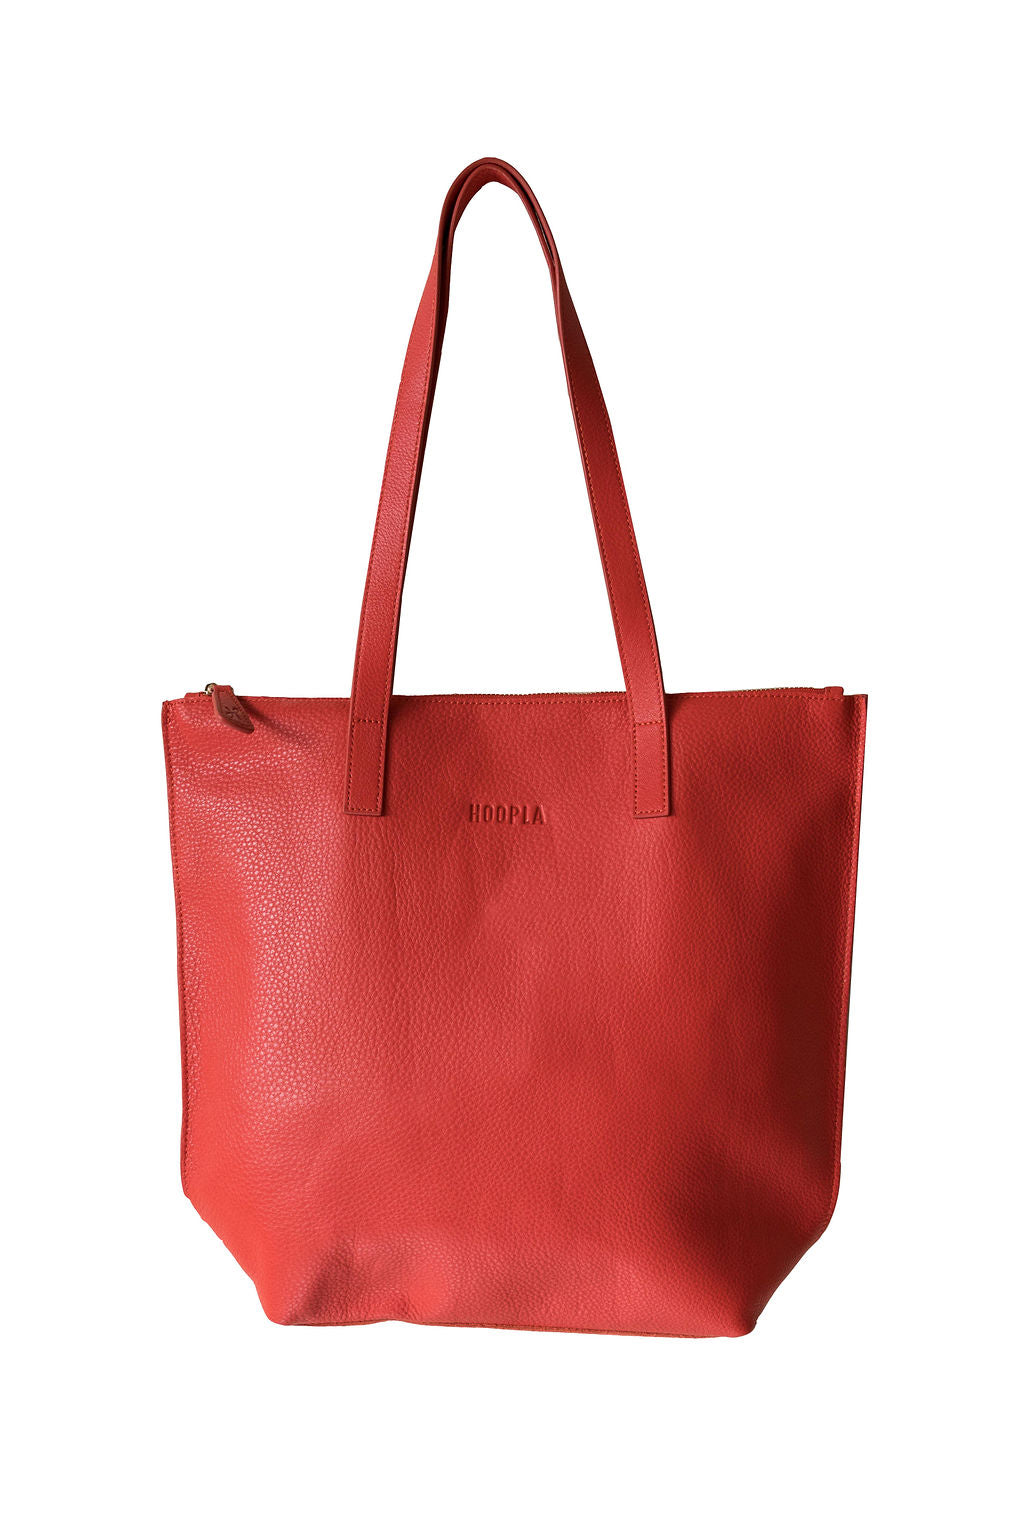 Front buttery soft red pebbled leather Hoopla tote bag with a gold coloured zip. 